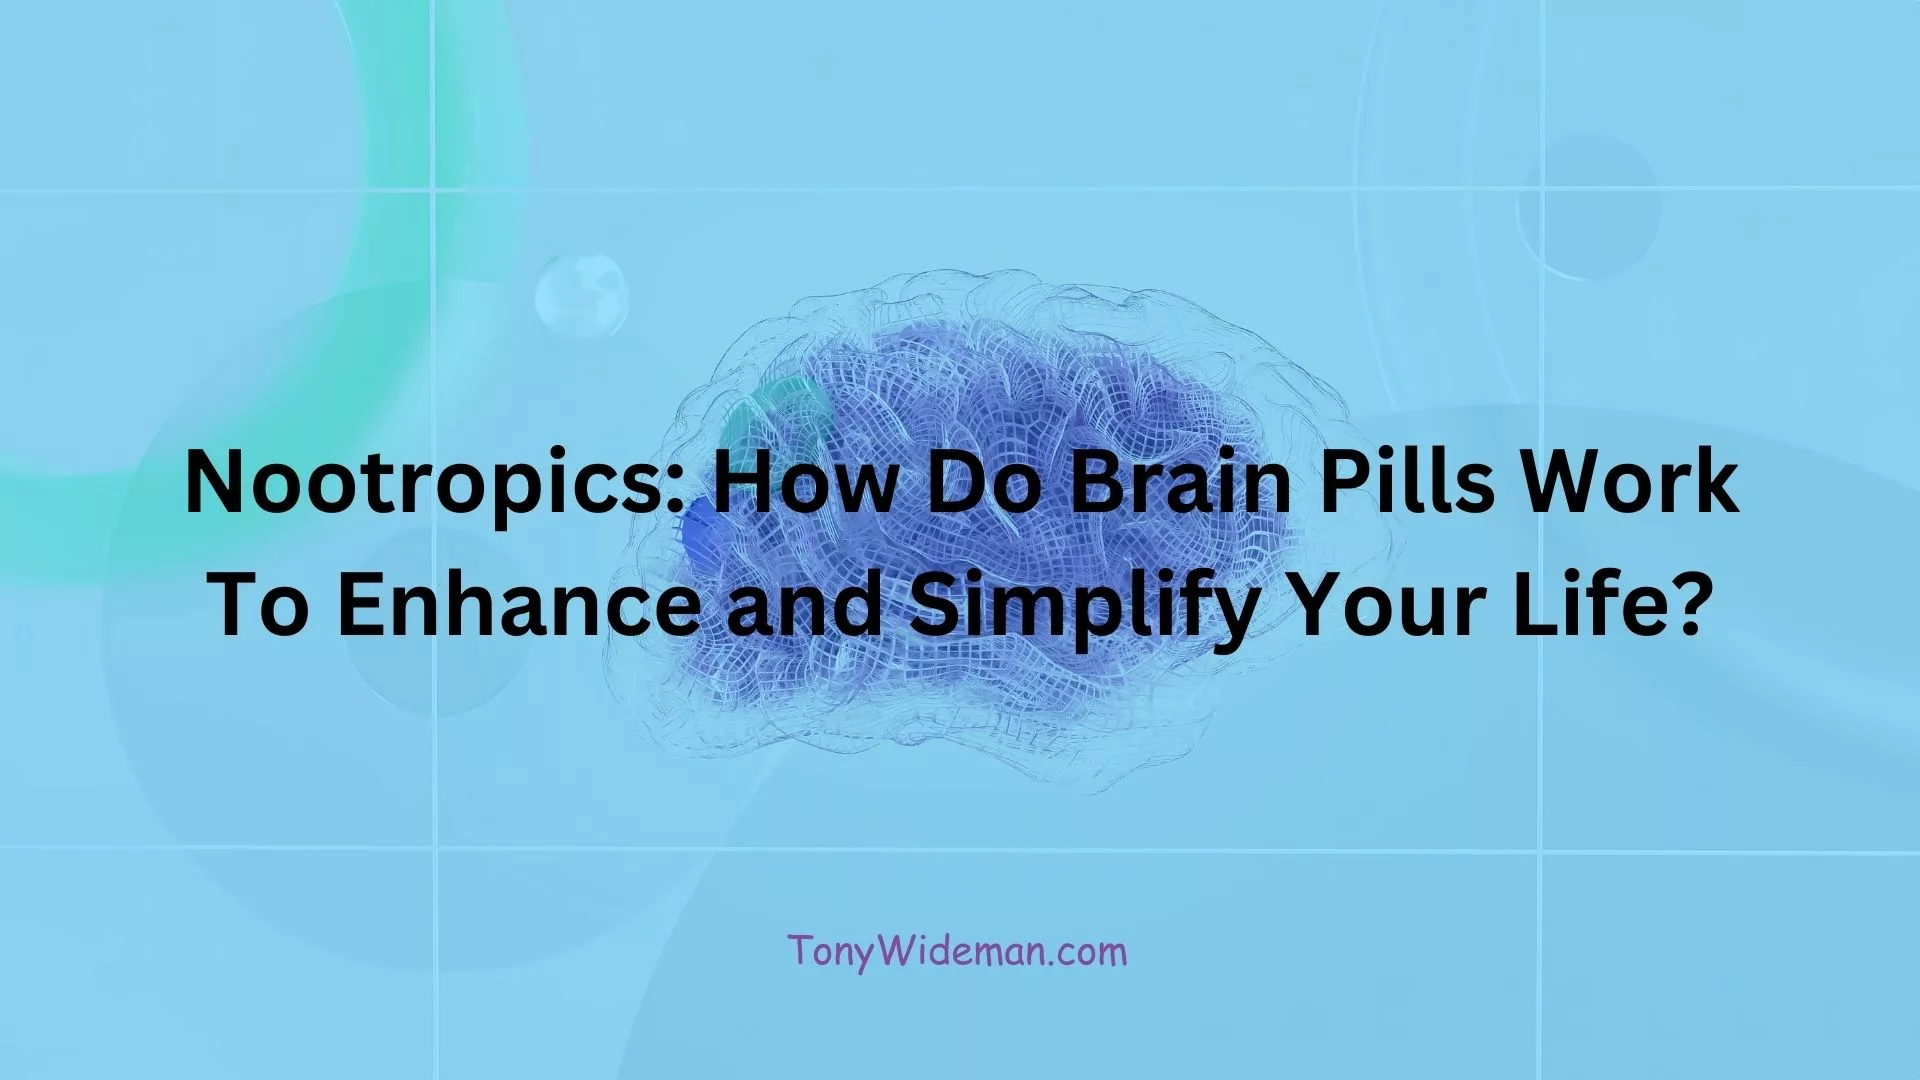 Nootropics: How Do Brain Pills Work To Enhance and Simplify Your Life?